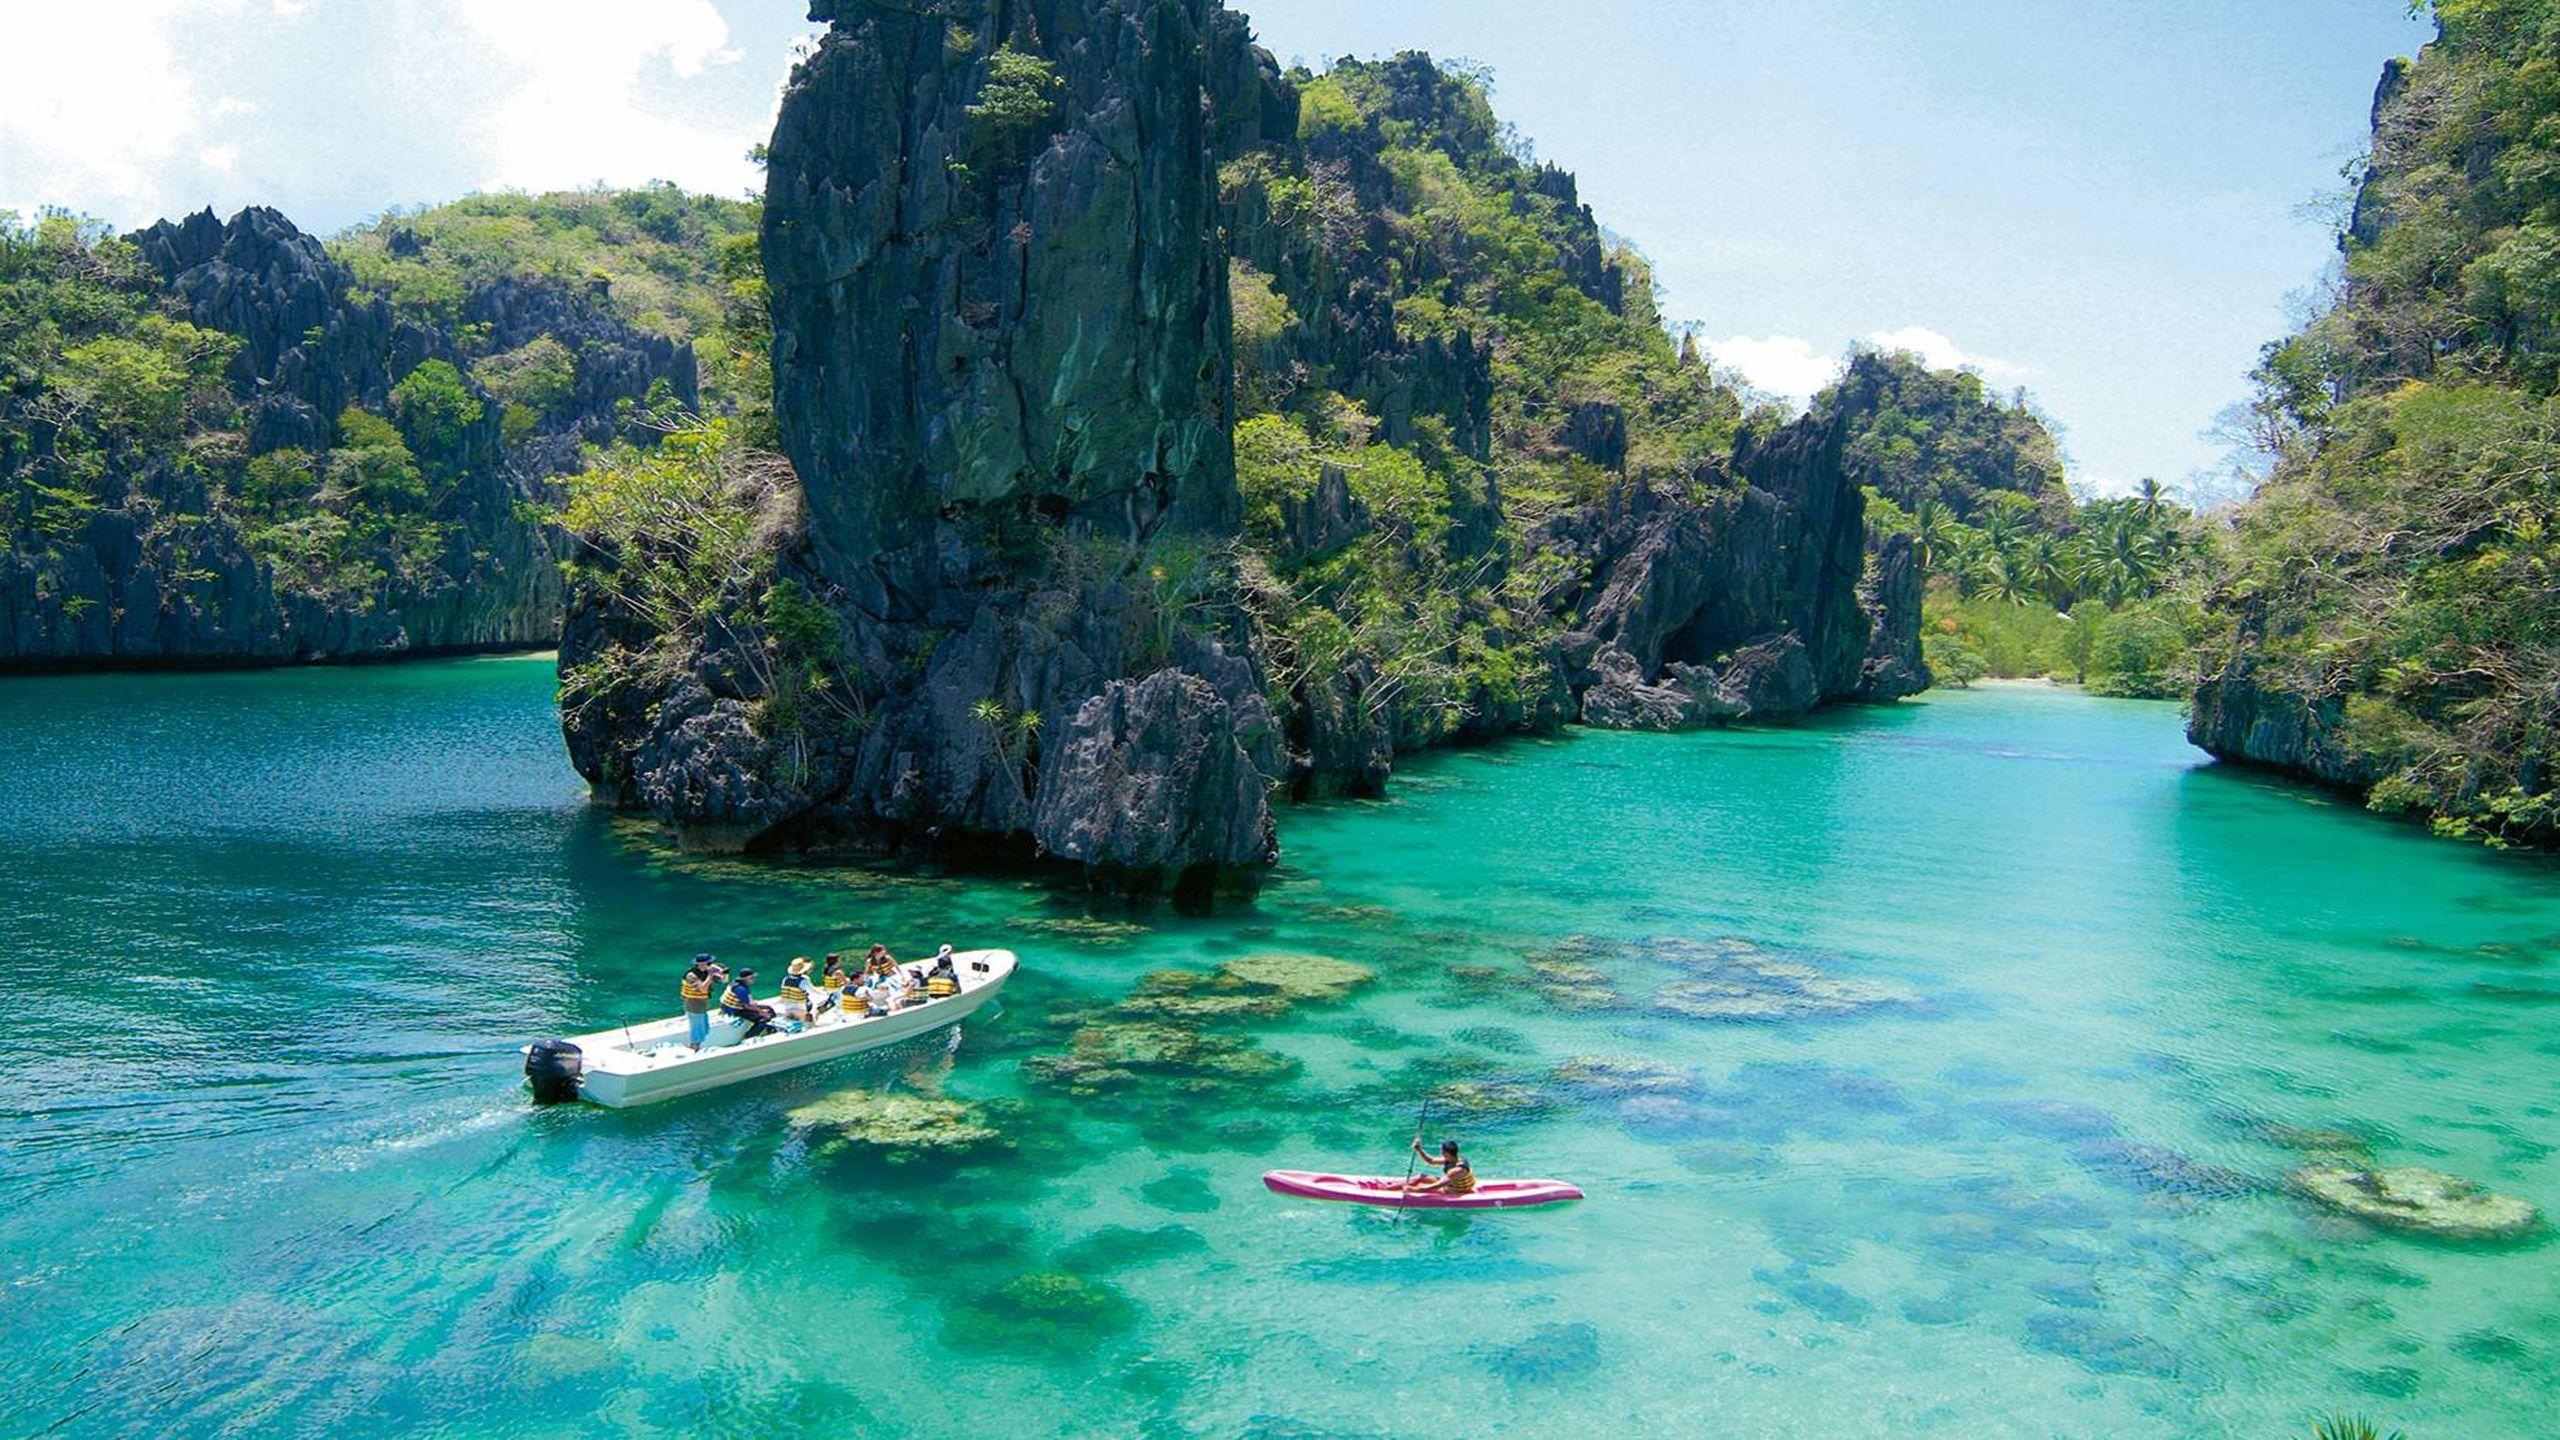 Coron Philippines Wallpapers - Top Free Coron Philippines Backgrounds